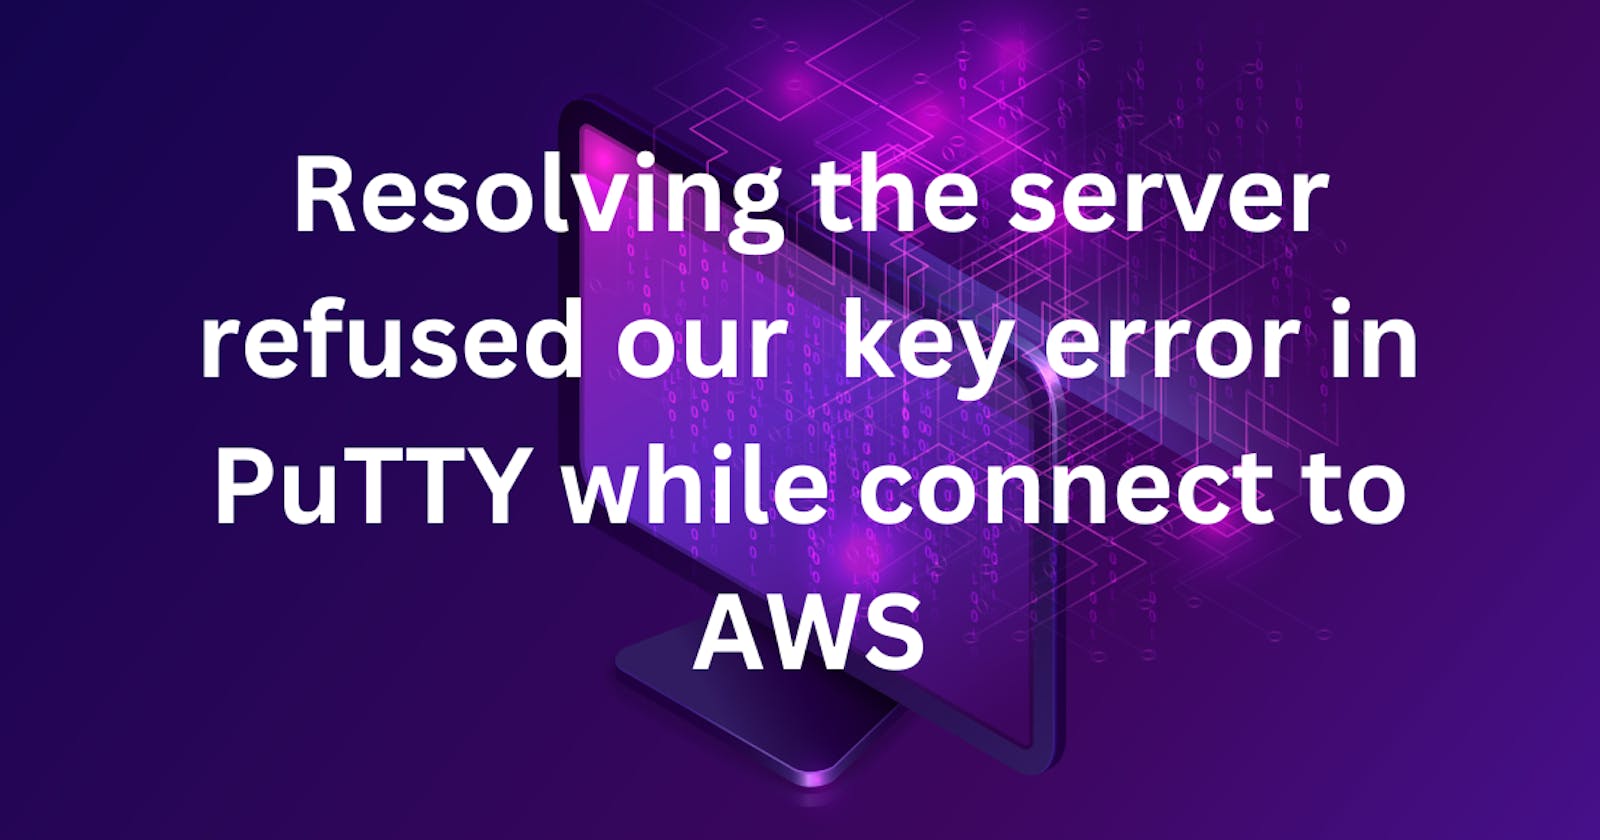 How to resolve "server refused our key" error while putty connect AWS EC2 instance?